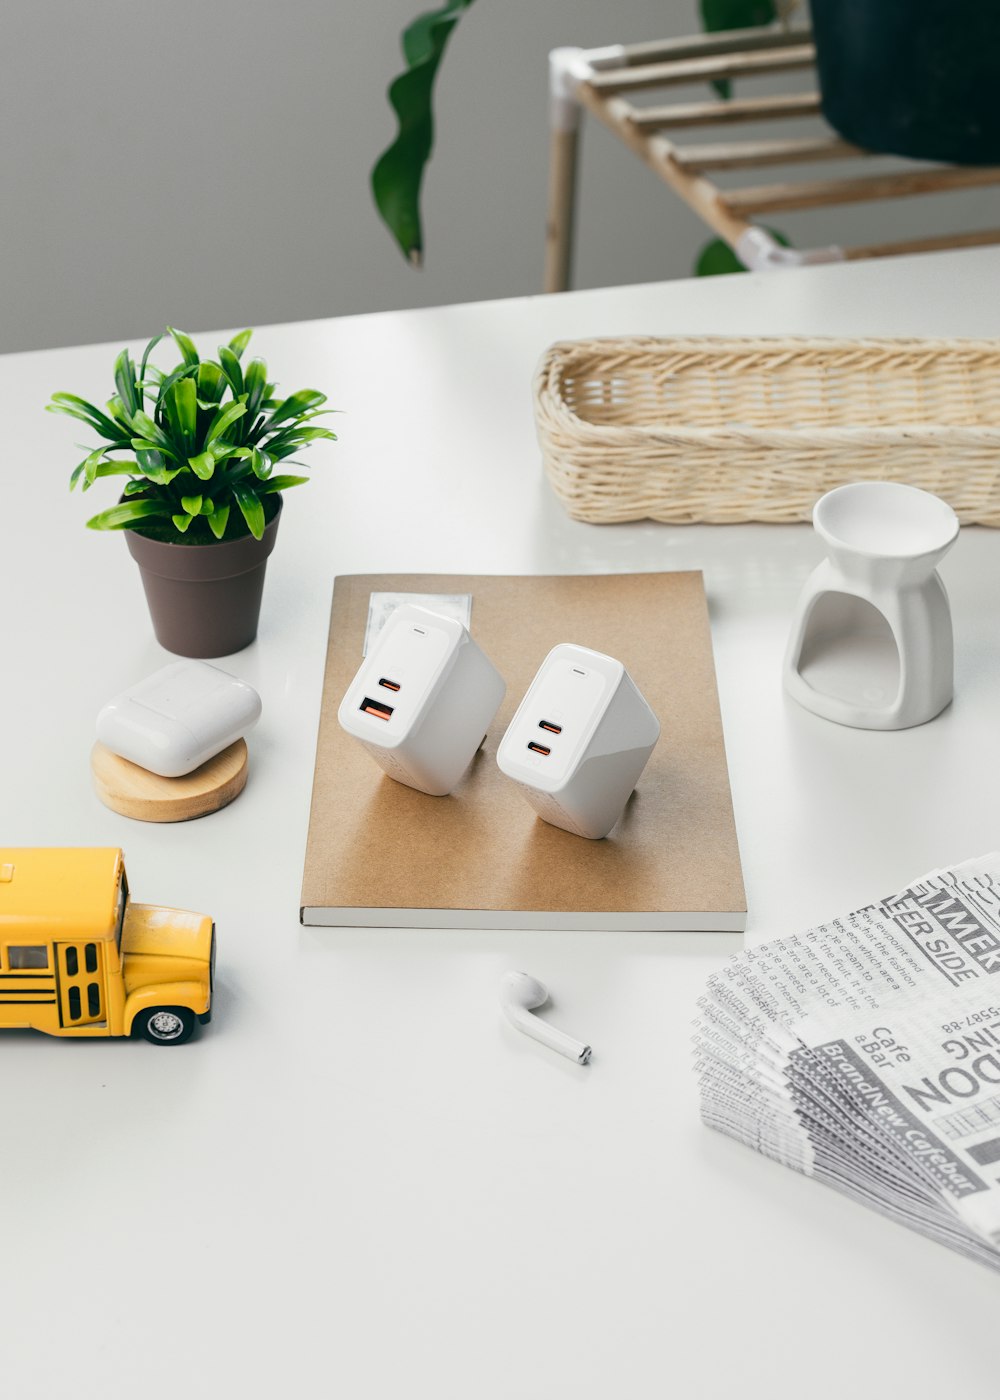 white apple charger adapter beside yellow box